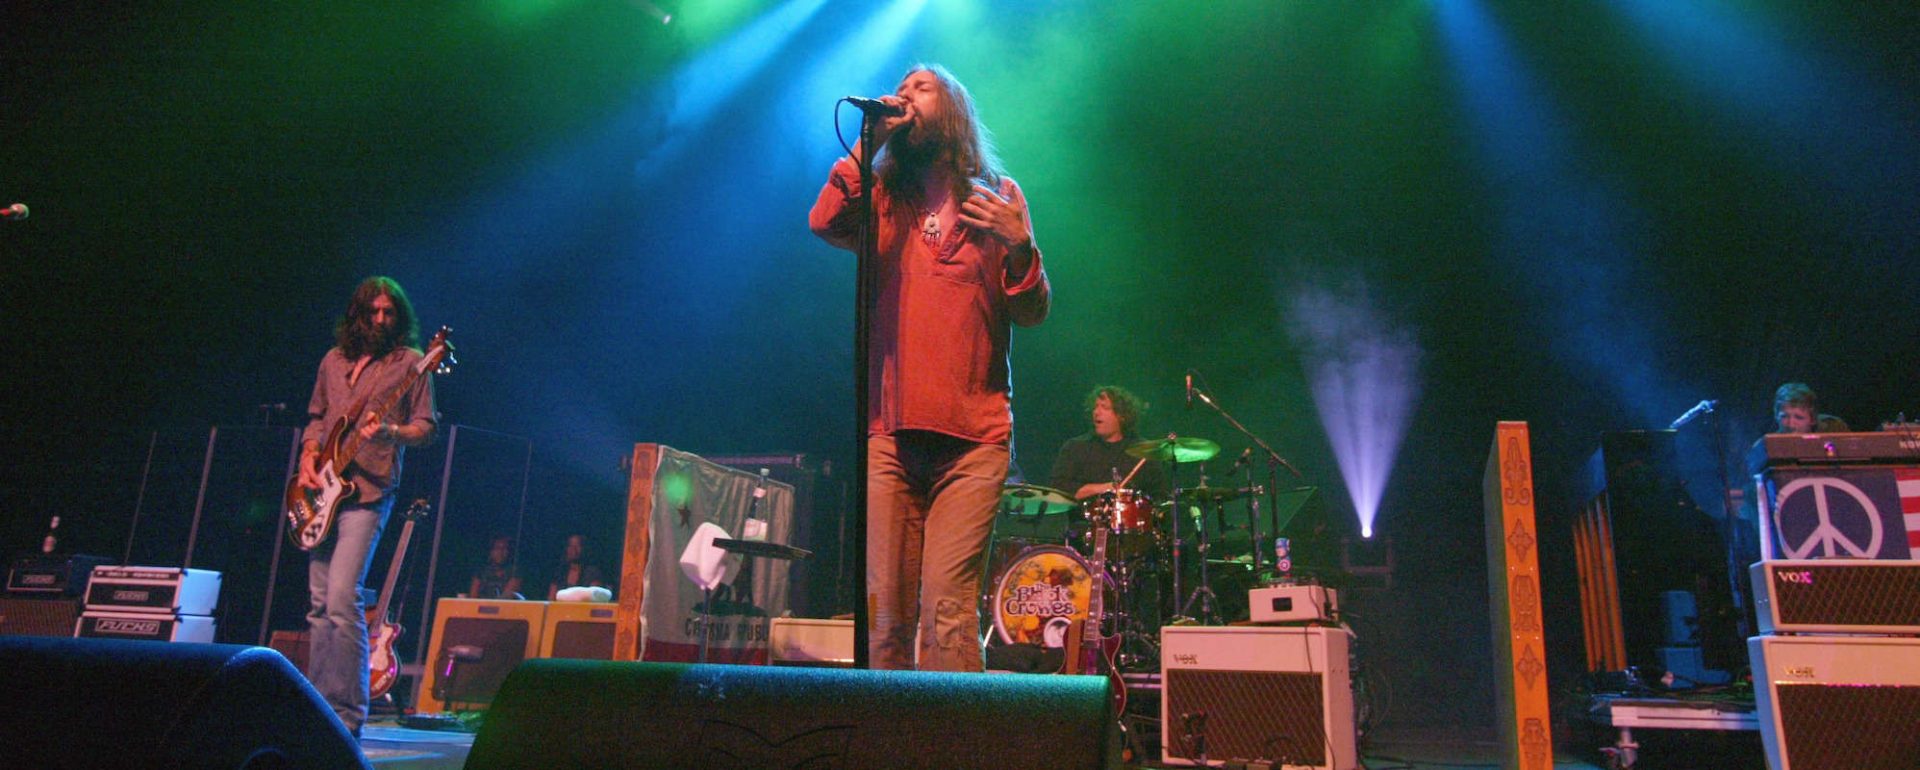 The Black Crowes at Concord Pavilion